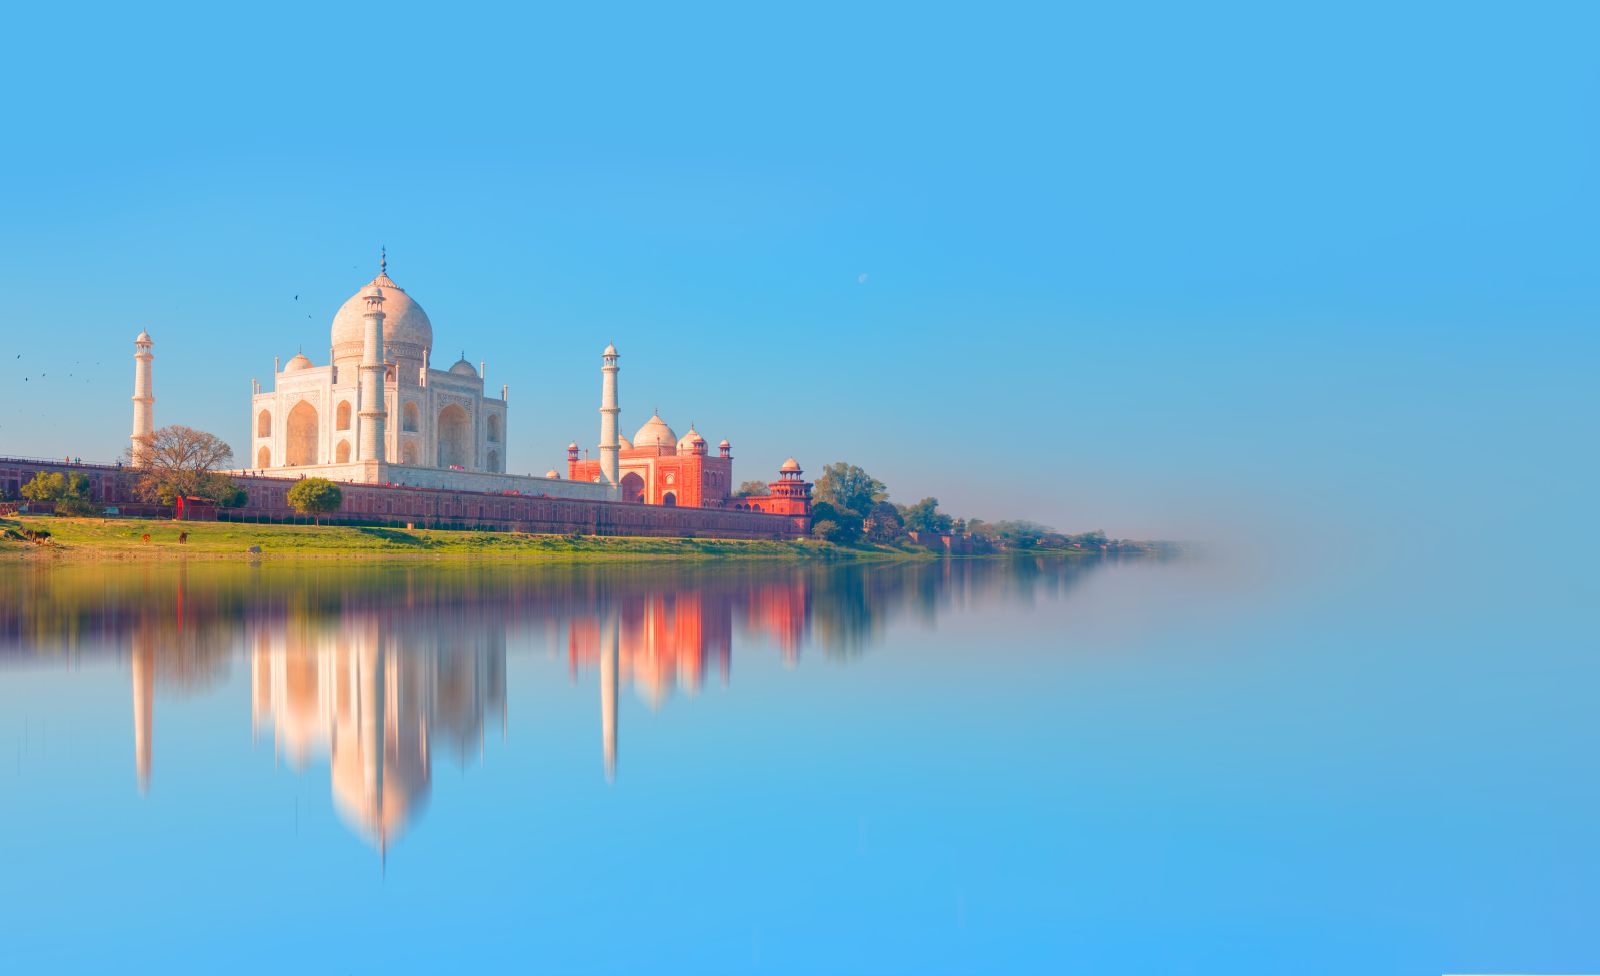 Distant view of the Taj Mahal in reflection